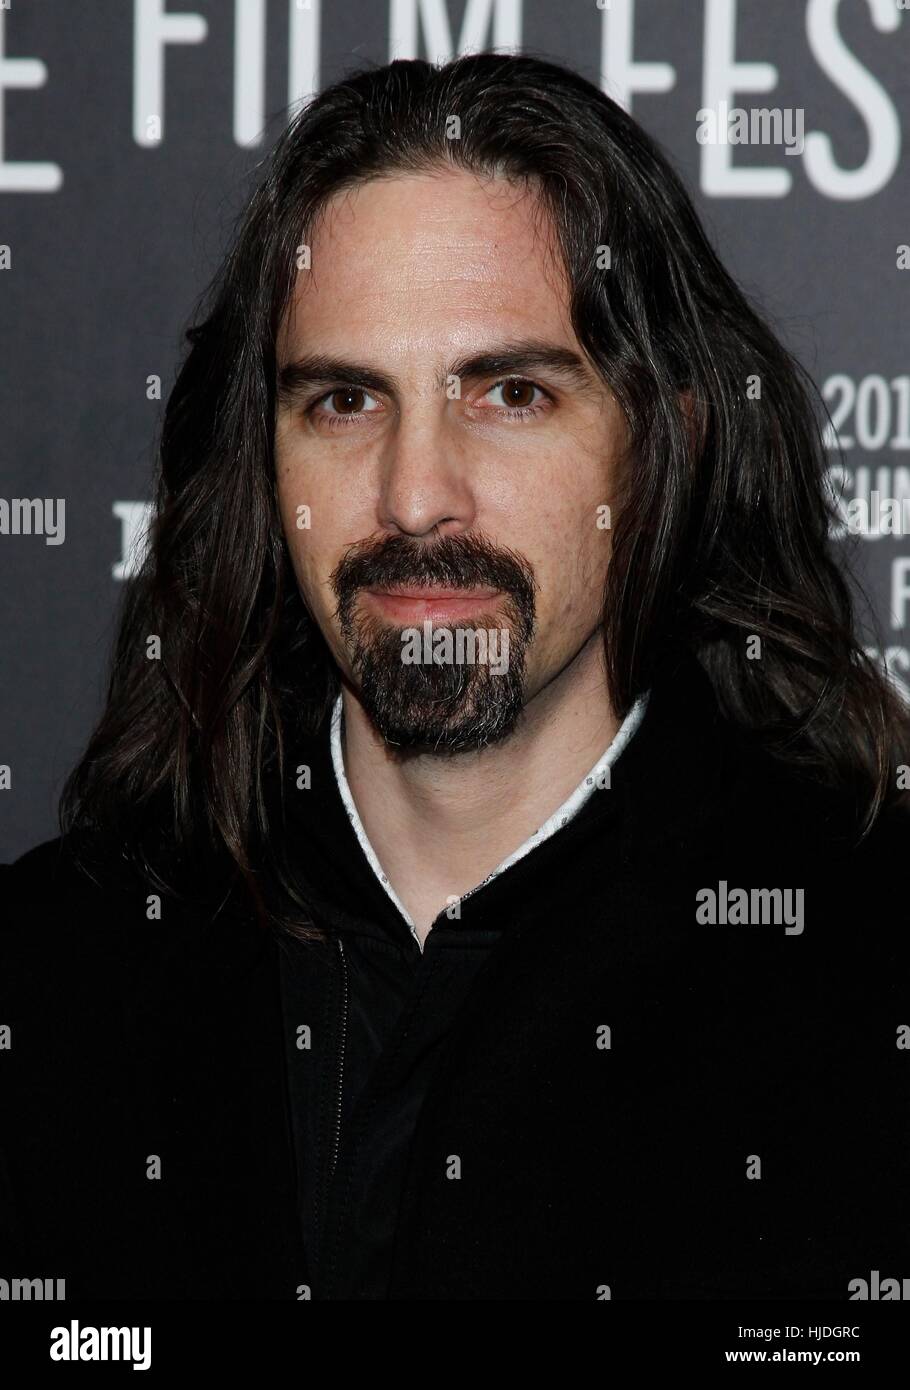 Park City, Utah, USA. 24th Jan, 2017. Bear McCreary at arrivals for REBEL IN THE RYE Premiere at Sundance Film Festival 2017, Eccles Theatre, Park City, UT January 24, 2017. Credit: James Atoa/Everett Collection/Alamy Live News Stock Photo